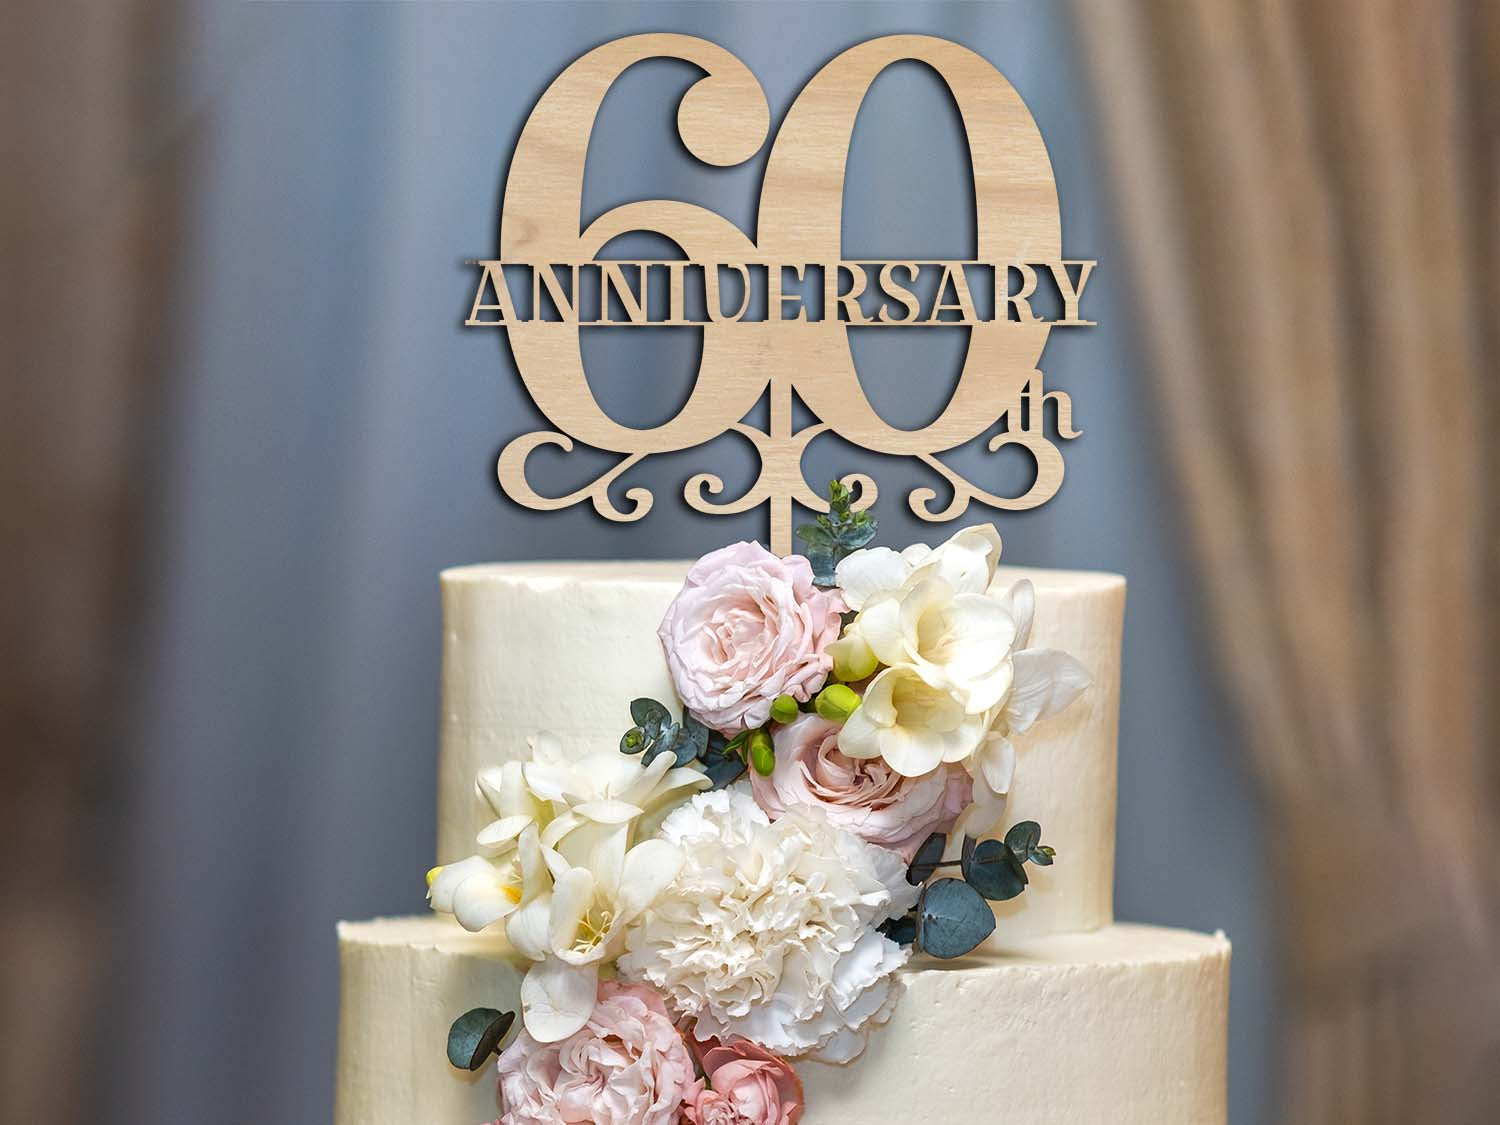 60th Anniversary Wooden Cake Topper